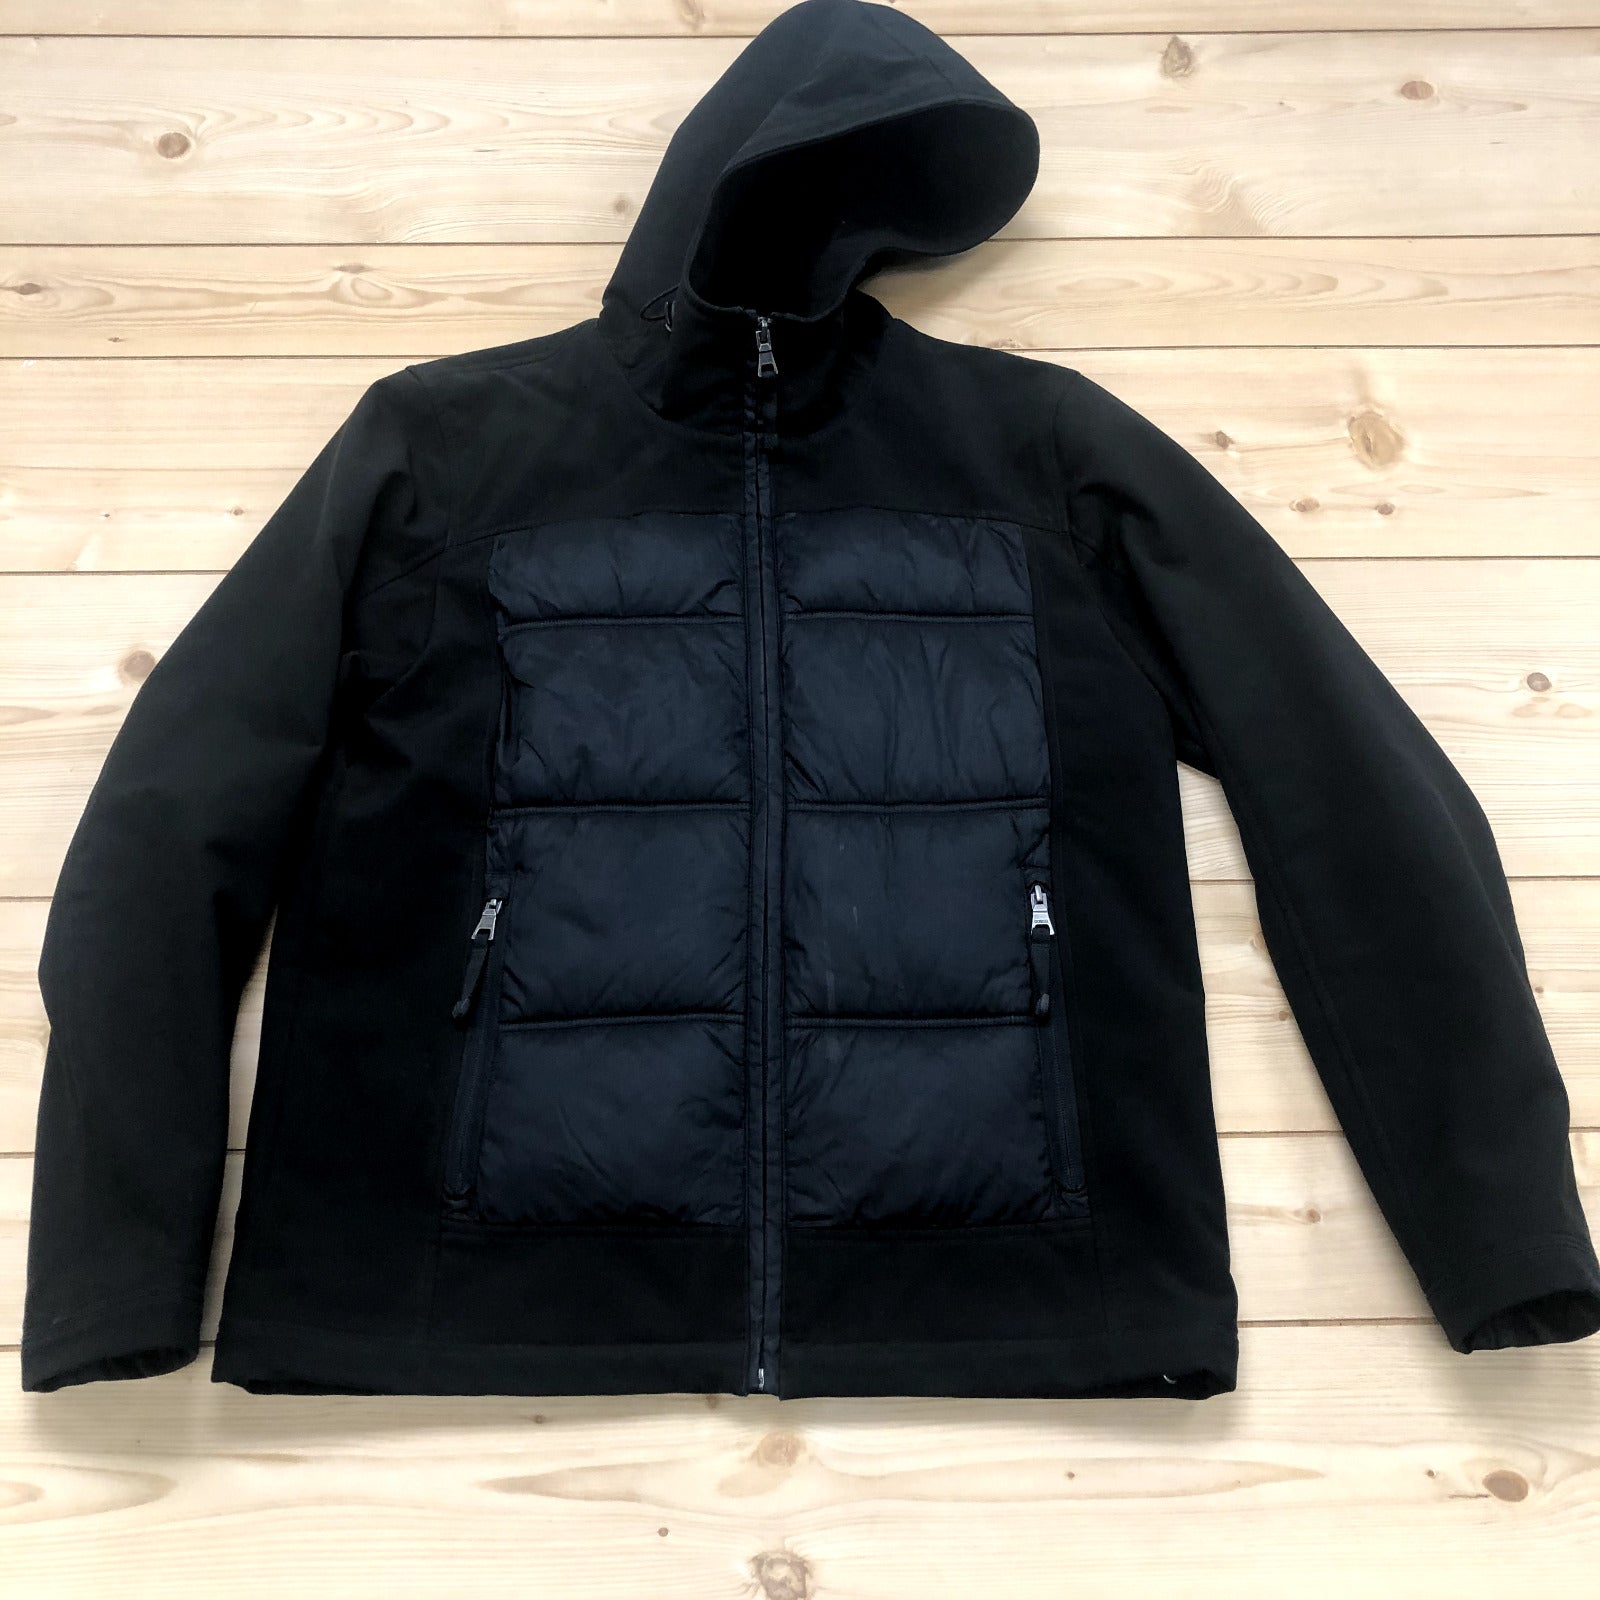 Guess Black Part Puffer Long Sleeve Full Zip Pockets Hooded Jacket Adult Size M